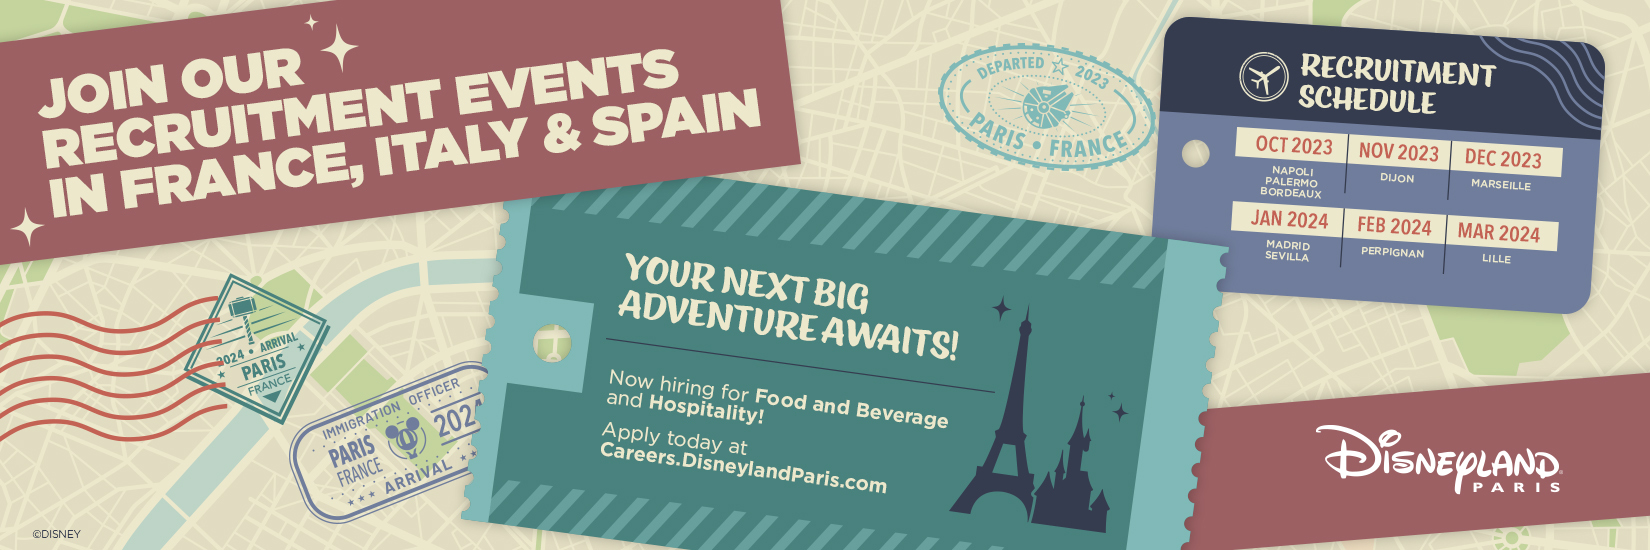 JOIN OUR RECRUITMENT EVENTS IN France, ITALY & SPAIN 
                        YOUR NEXT BIG ADVENTURE AWAITS ! 
                        Now hiring for Food and Beverage and Hospitaility ! 
                        Apply today at Careers.DisneylandParis.com   
                        RECRUITMENT SCHEDULE 
                        OCT 2023 – NAPLES, PALERME, BORDEAUX 
                        NOV 2023 – DIJON 
                        DEC 2023 – MARSEILLE 
                        JAN 2024 – MADRID, SEVILLE 
                        FEB 2024 – PERPIGNAN 
                        MAR 2024 – LILLE   
                        Disneyland Paris